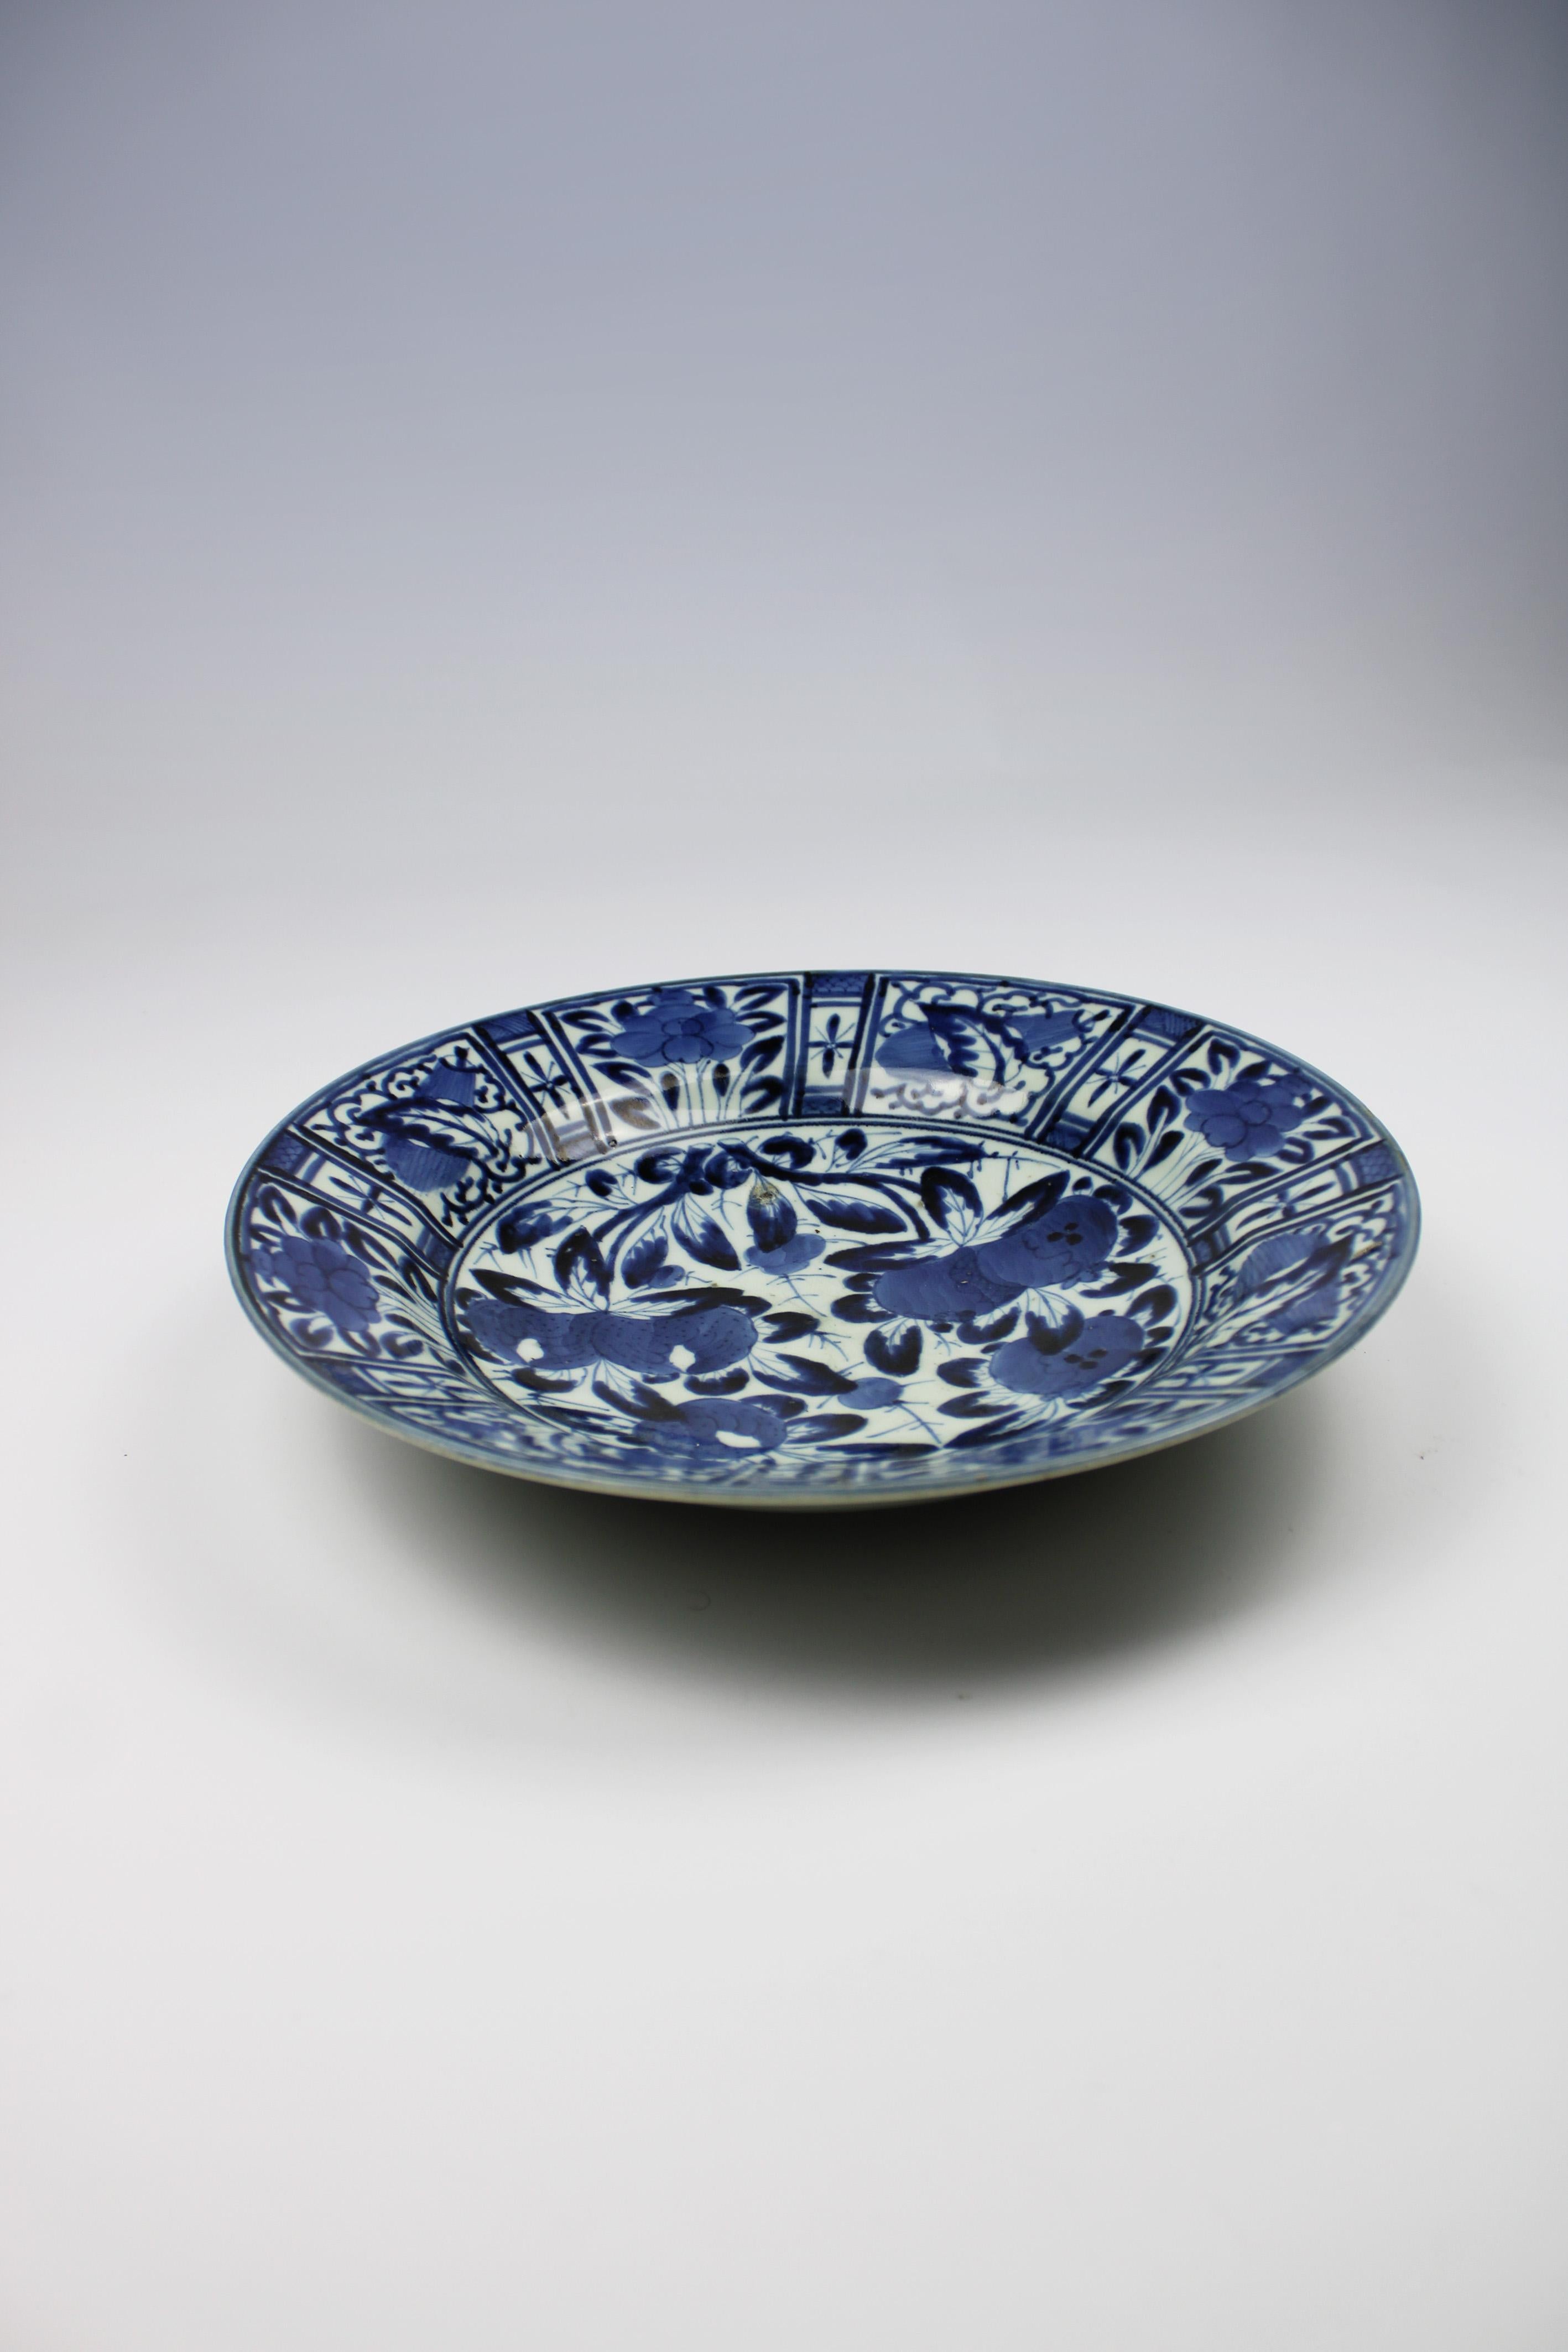 Introducing a captivating relic from the 17th century: a Kraak porcelain plate from Japan's Arita city, dating back to the illustrious Edo Period. This remarkable piece features exquisite hand-painted fruit motifs in classic blue and white,